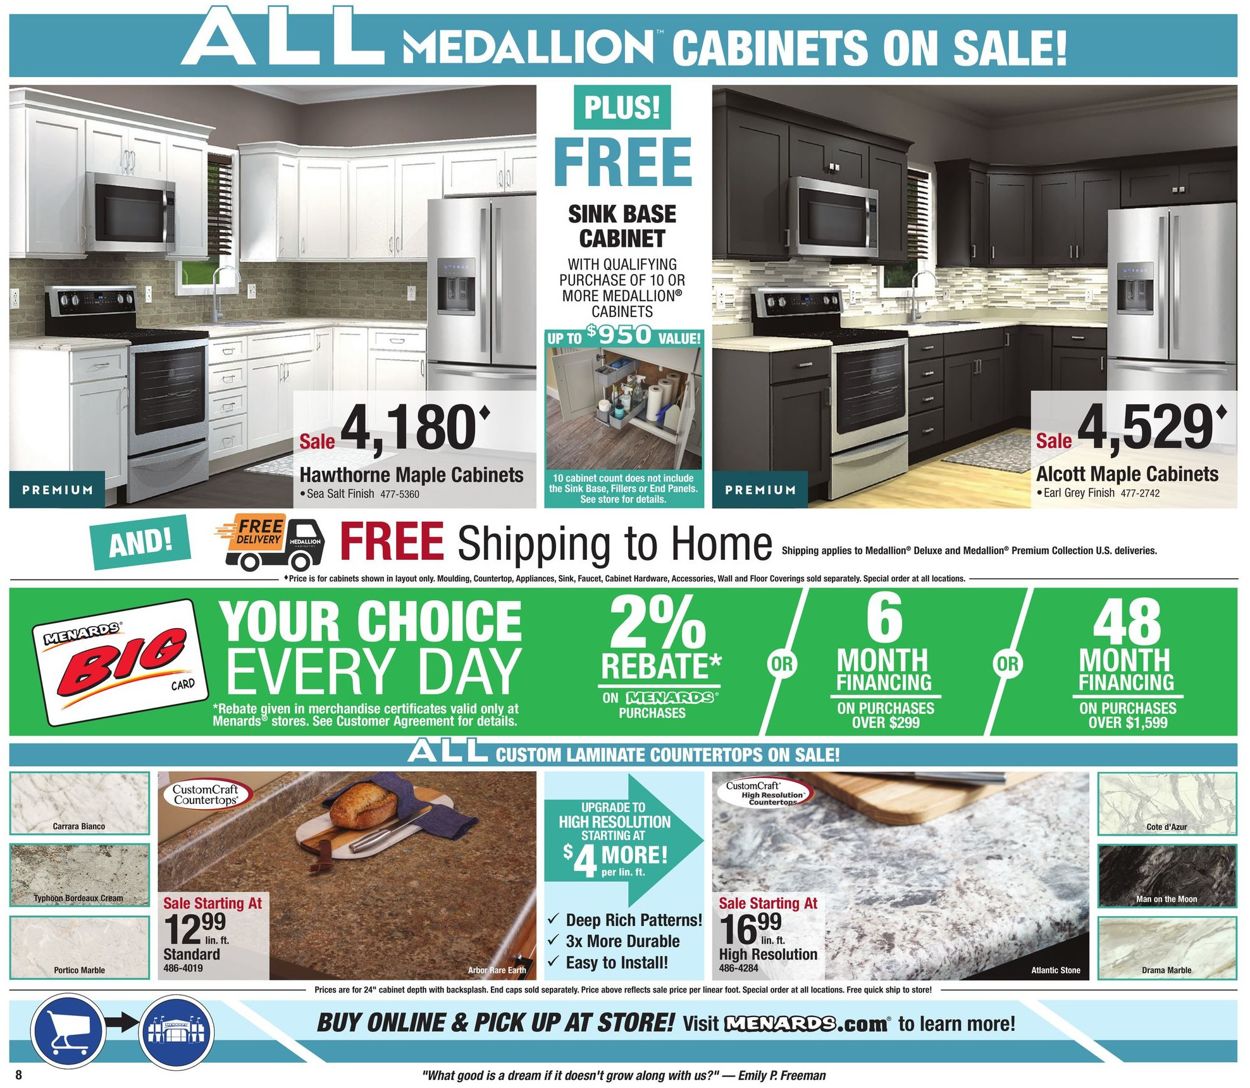 Catalogue Menards - New Year's Ad 2019/2020 from 12/22/2019